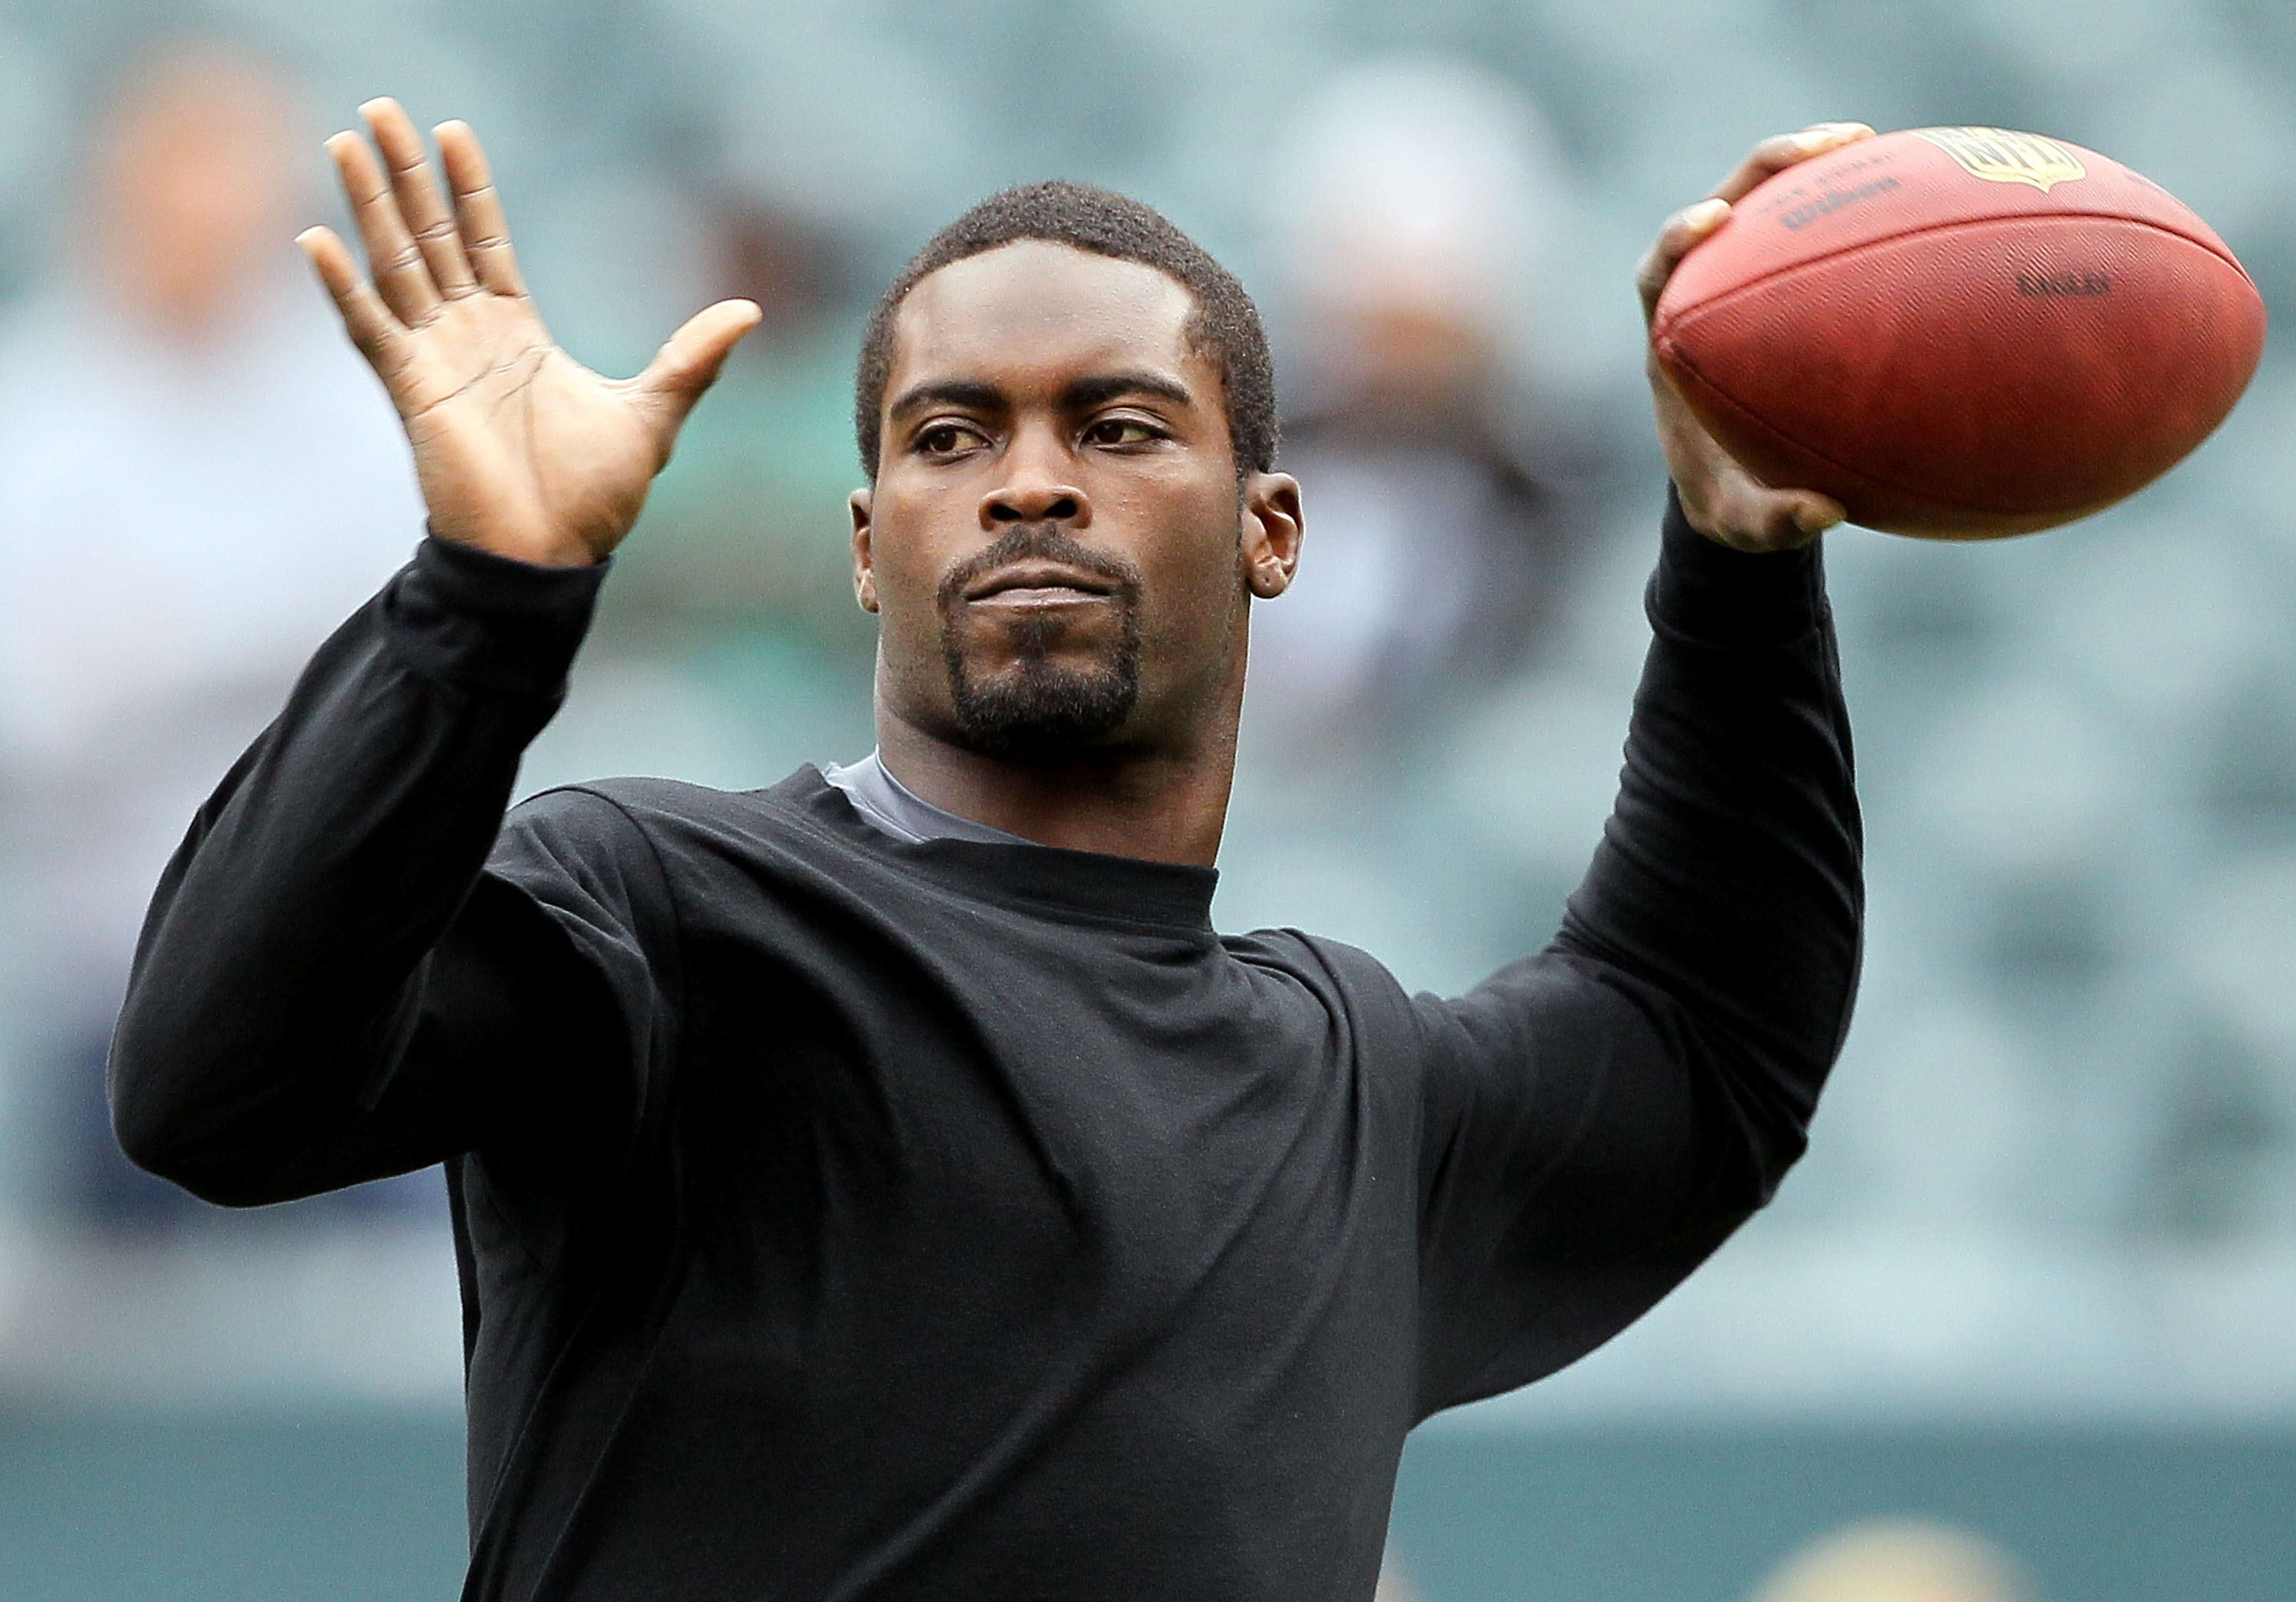 PHILADELPHIA - OCTOBER 03:  Michael Vick #7 of the Philadelphia Eagles warms up before playing against the Washington Redskins on October 3, 2010 at Lincoln Financial Field in Philadelphia, Pennsylvania.  (Photo by Jim McIsaac/Getty Images)